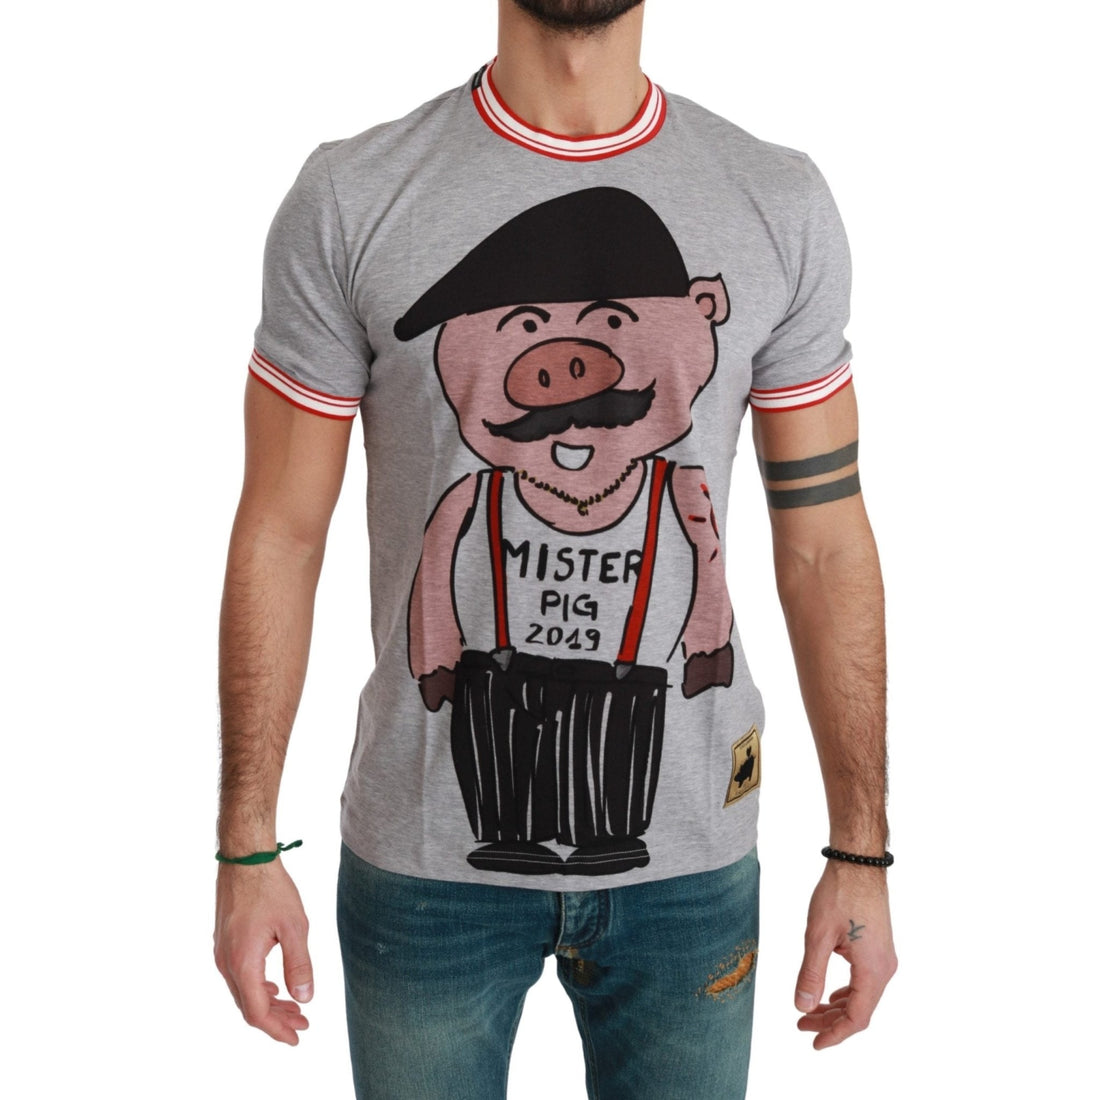 Dolce & Gabbana Gray Cotton Top 2019 Year of the Pig T-shirt - Paris Deluxe